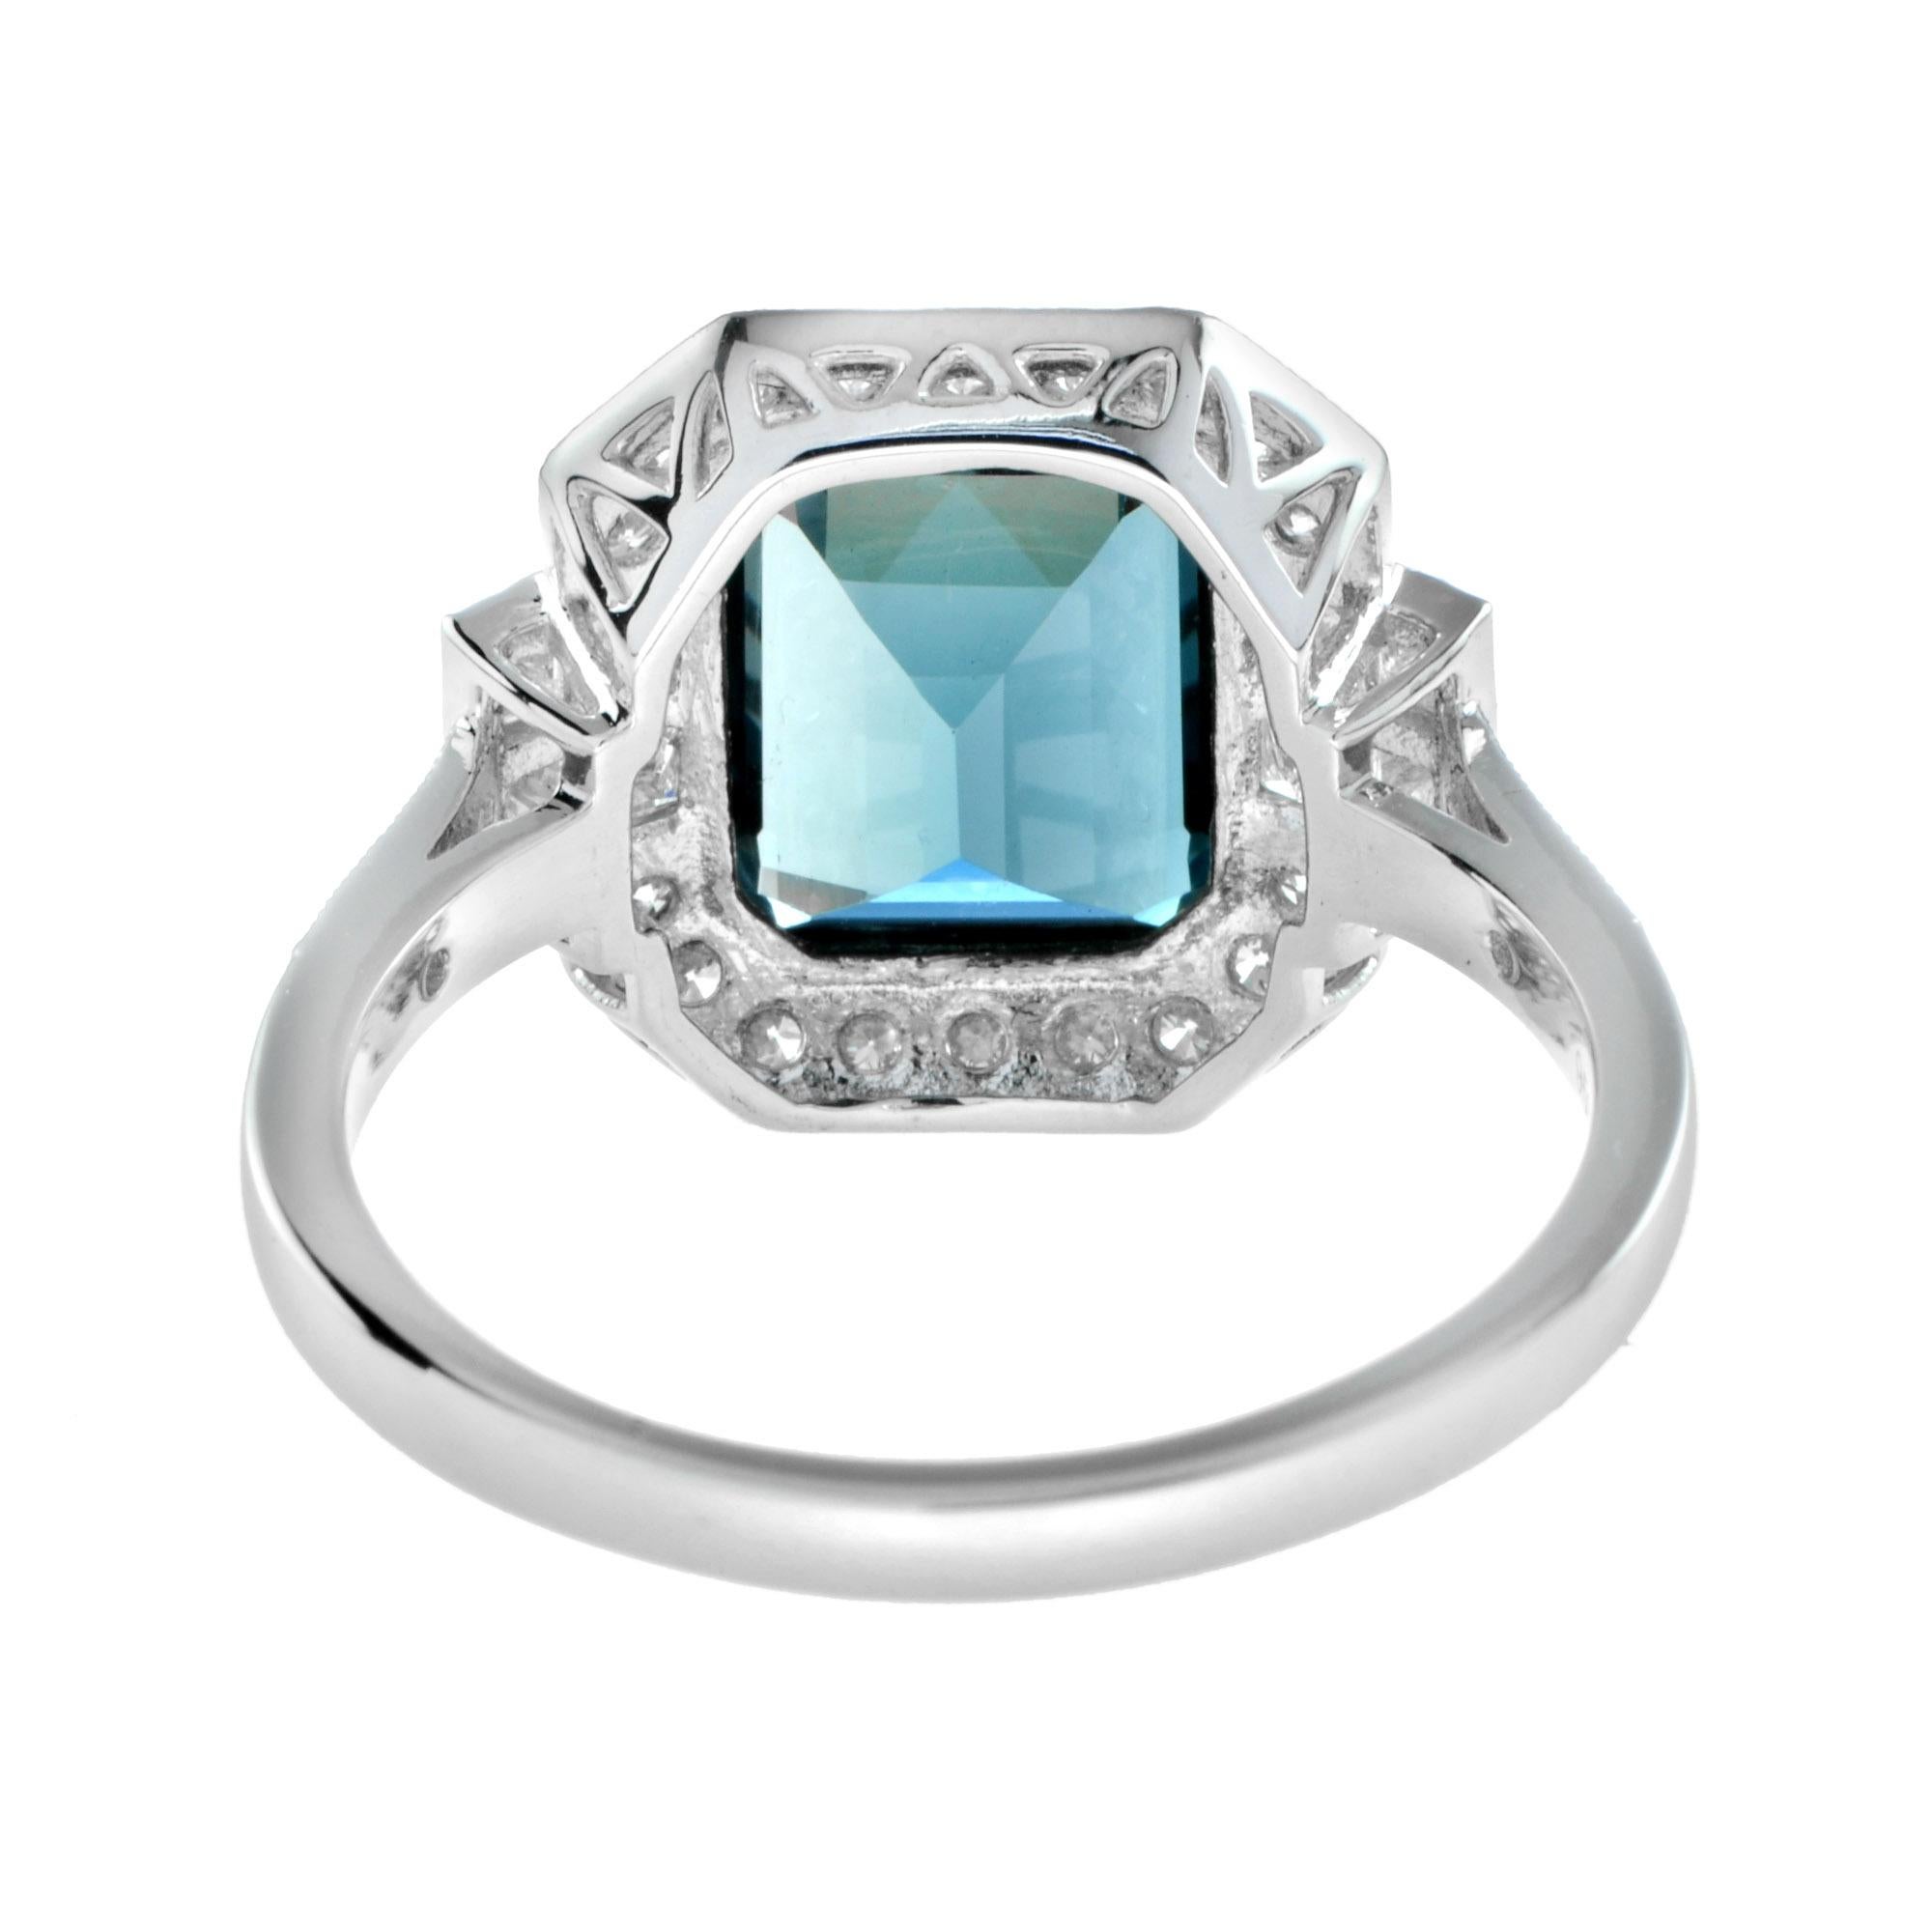 For Sale:  Emerald Cut London Blue Topaz with Diamond Engagement Ring in Platinum 5